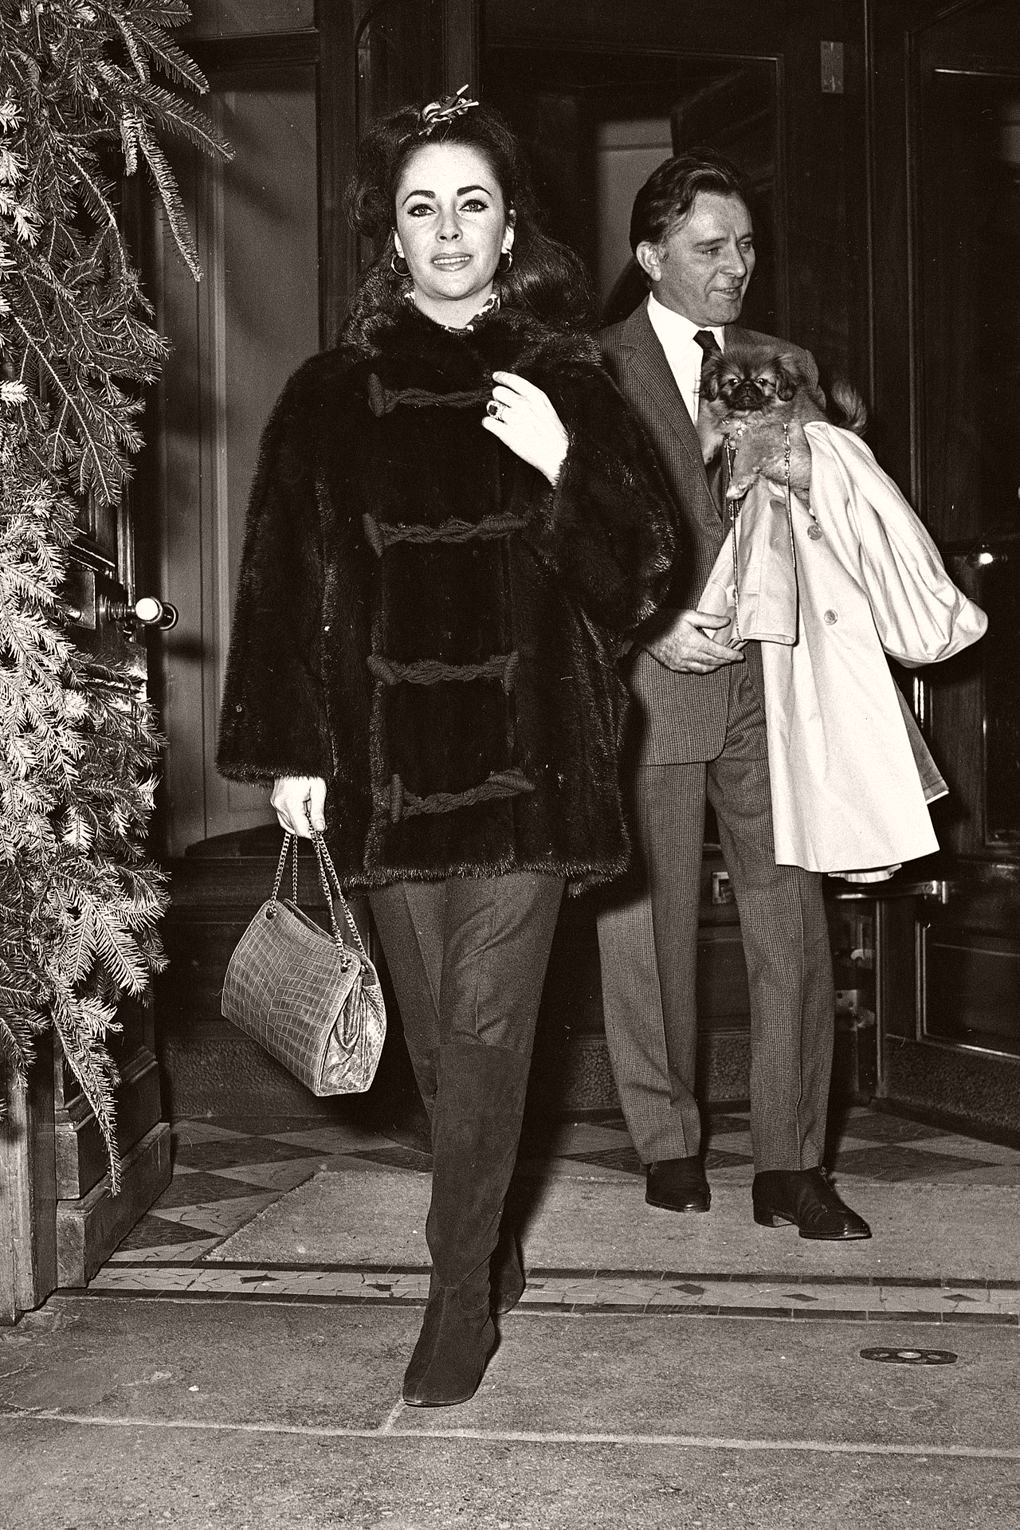 Elizabeth Taylor married Richard Burton in March 1964 and they adopted their daughter Maria that same year. Here, the couple are pictured at the Lancaster Hotel in Paris, where they spent Christmas with their children. Taylor is wearing a $6,000 mink ski jacket from Chombert as she strides past a Christmas tree towards the camera. Burton in the background holds a dog in his arms